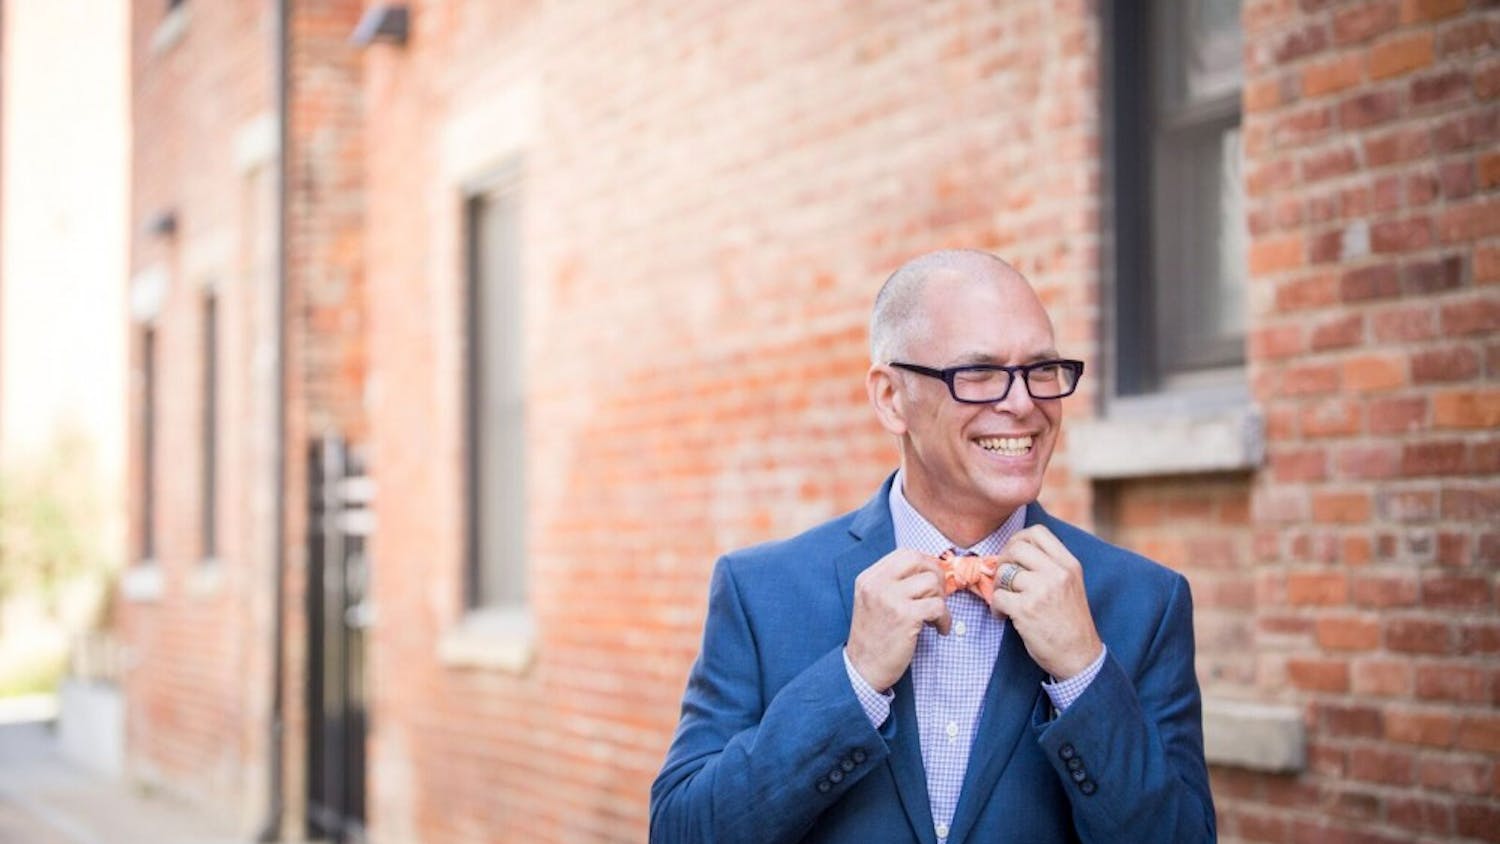 Jim Obergefell, lead plaintiff in the Supreme Court's same-sex marriage&nbsp;case, stressed the importance&nbsp;of the LGBTQ community continuing to push&nbsp;for transgender equality in 2016.&nbsp;Photo courtesy of Emma Parker Photography.